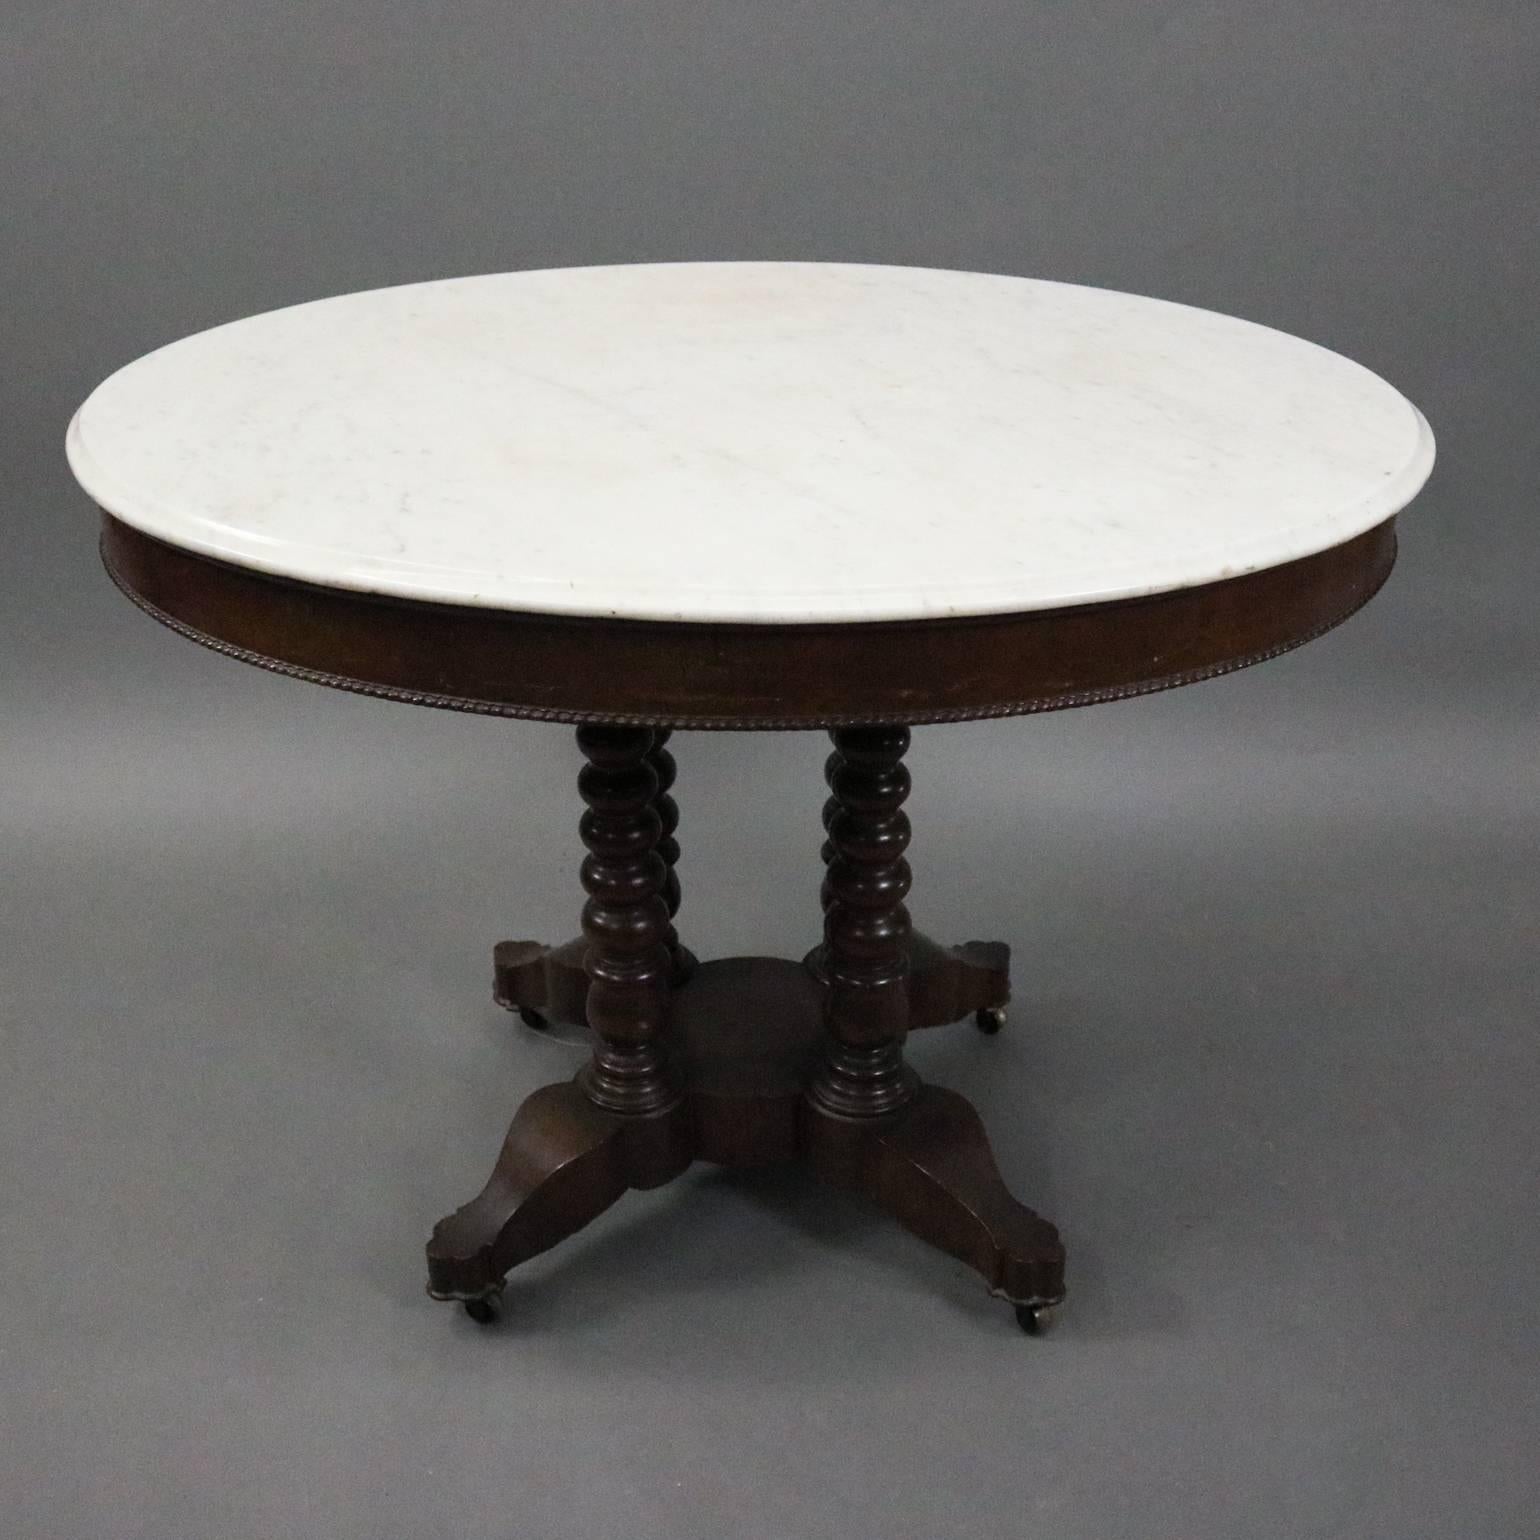 Antique parlor lamp table features oval marble top seated on carved walnut base with four ball turned legs, circa 1880

Measures: 29" H X 40" W X 32" D.